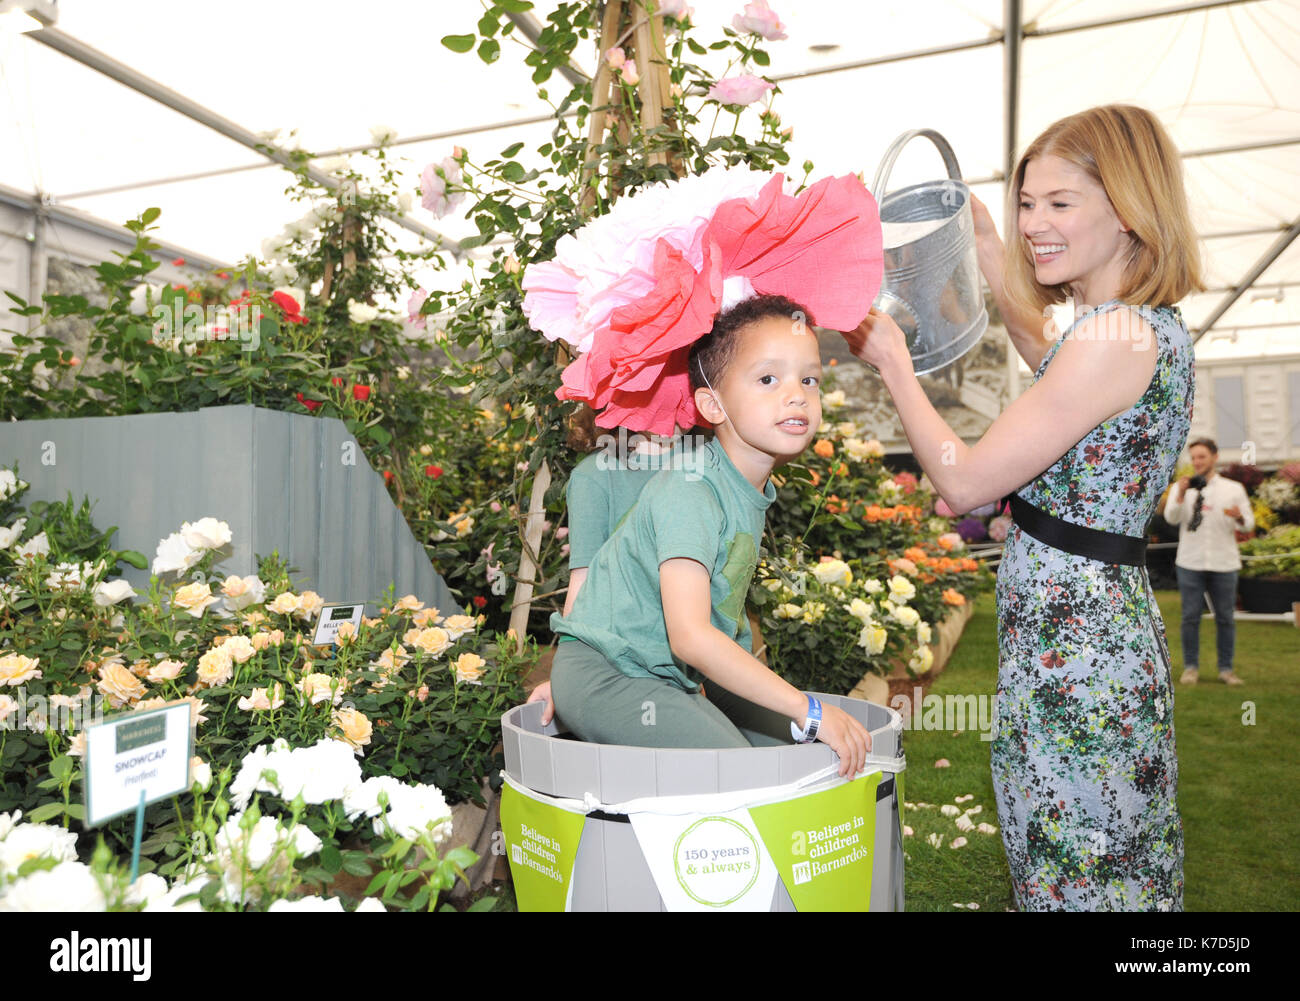 Photo Must Be Credited ©Alpha Press 079965 23/05/2016 Rosamund Pike at the RHS Chelsea Flower Show 2016 held at the Royal Hospital in Chelsea, London. Stock Photo